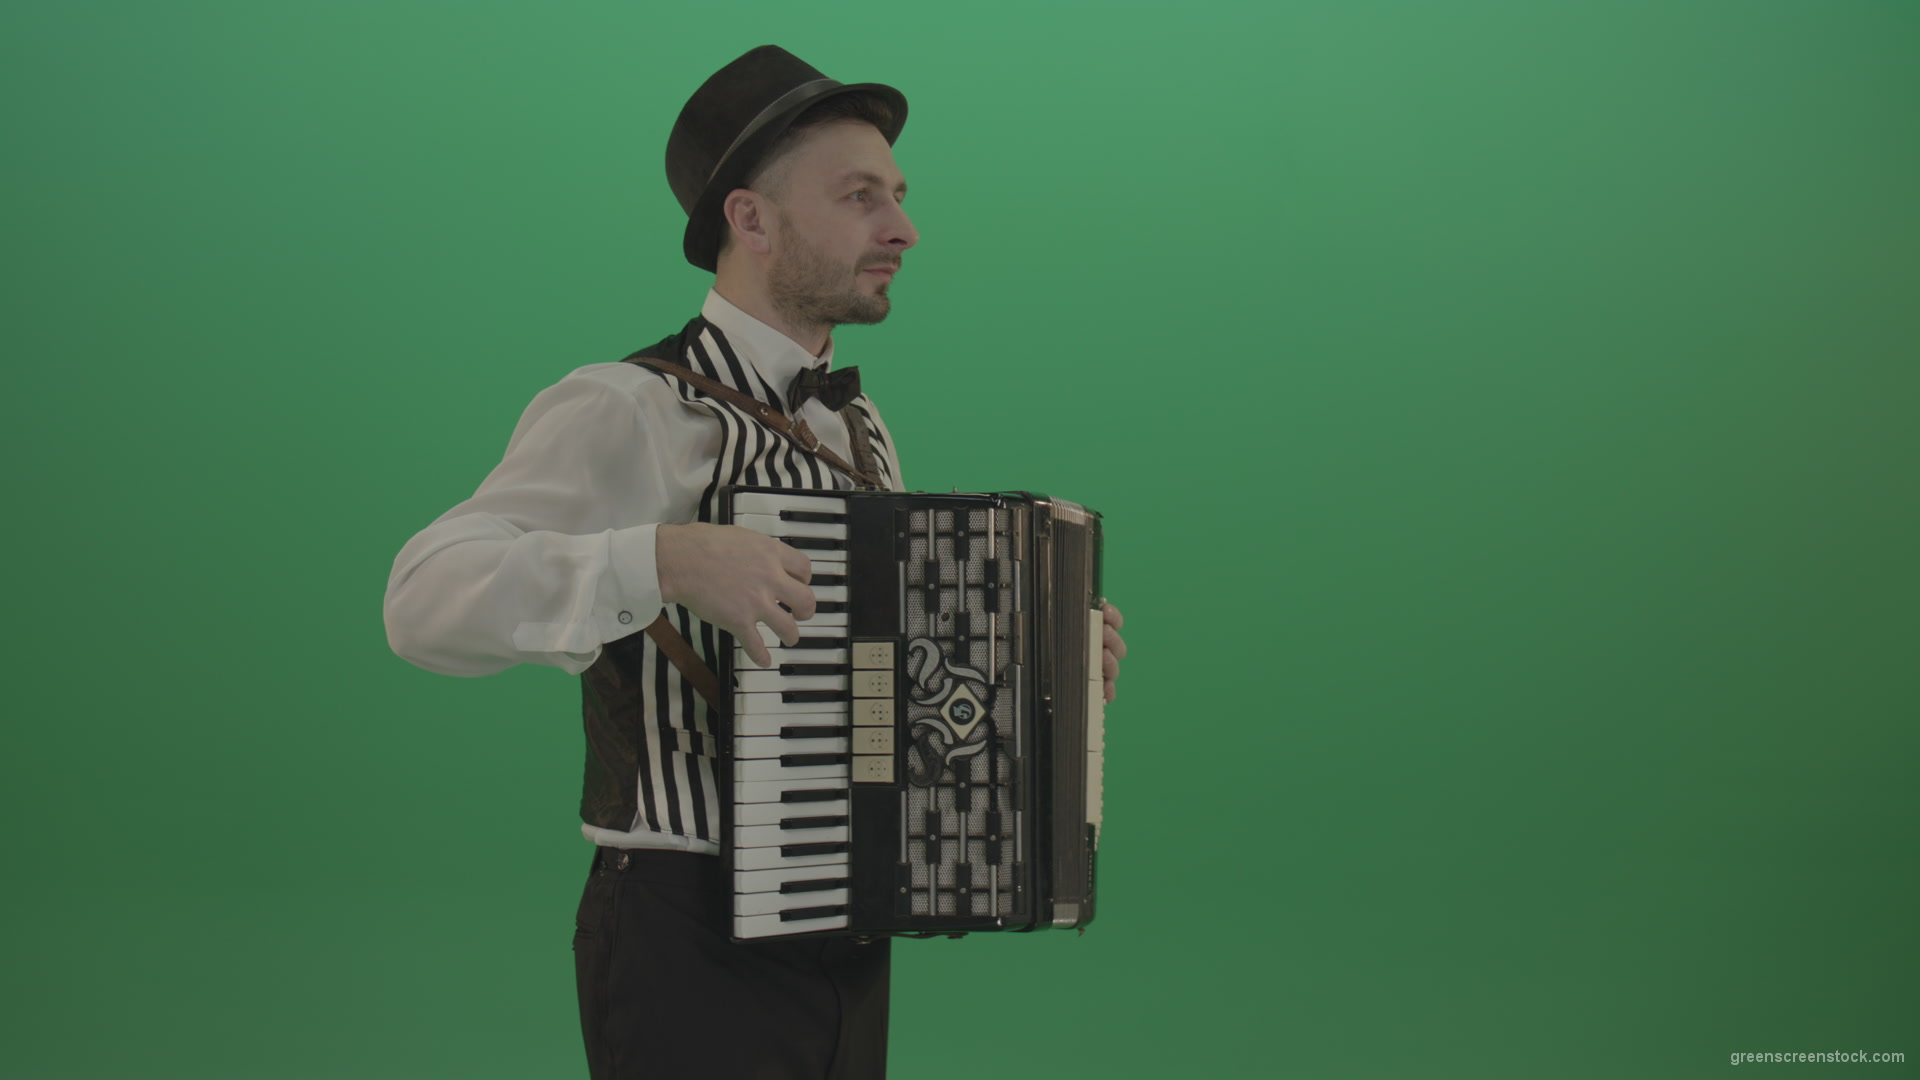 Man-in-hat-playing-Accordion-jazz-music-on-wedding-in-side-view-isolated-on-green-screen_001 Green Screen Stock